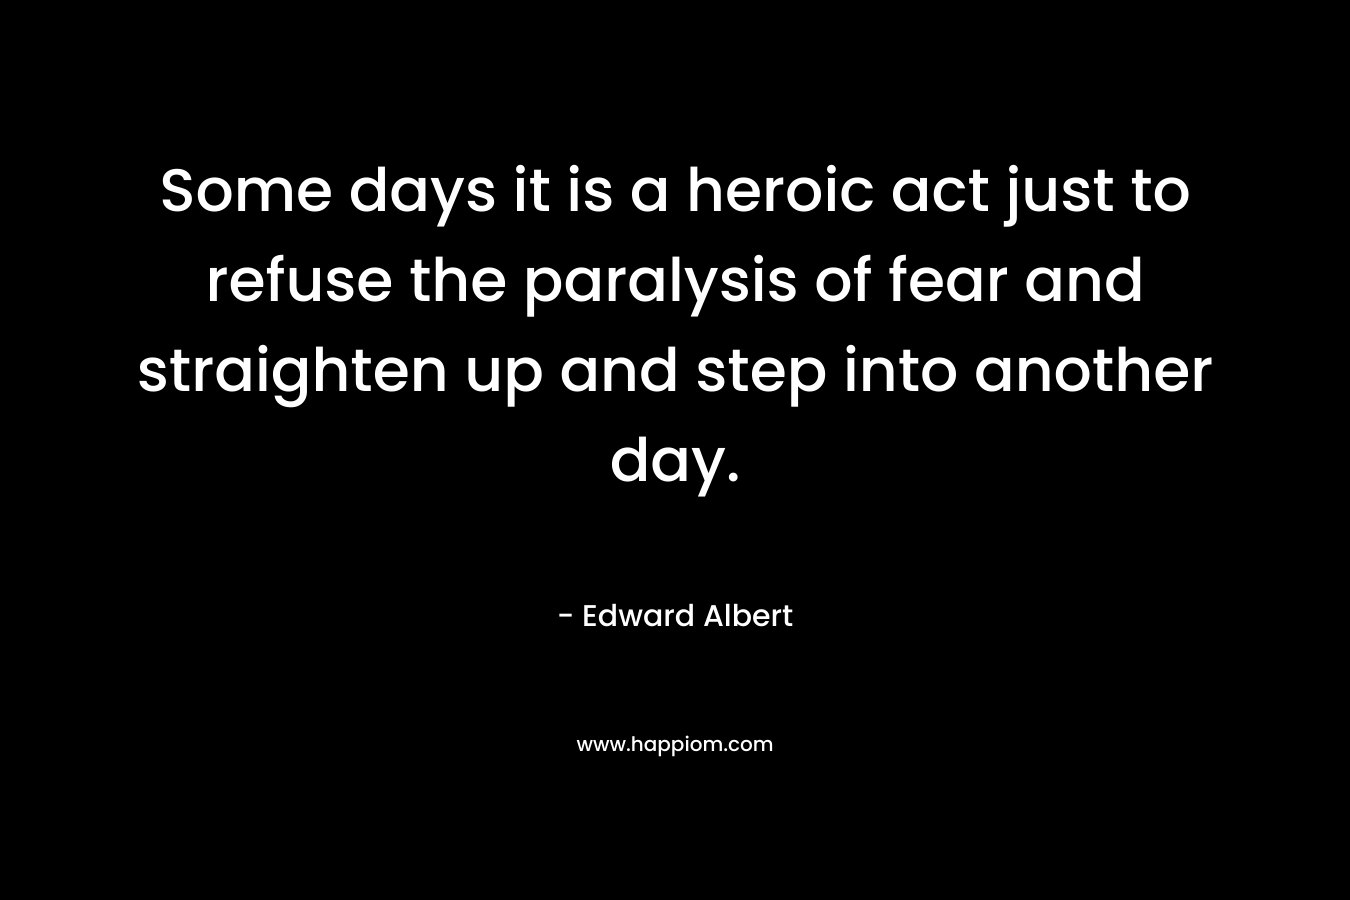 Some days it is a heroic act just to refuse the paralysis of fear and straighten up and step into another day. – Edward Albert